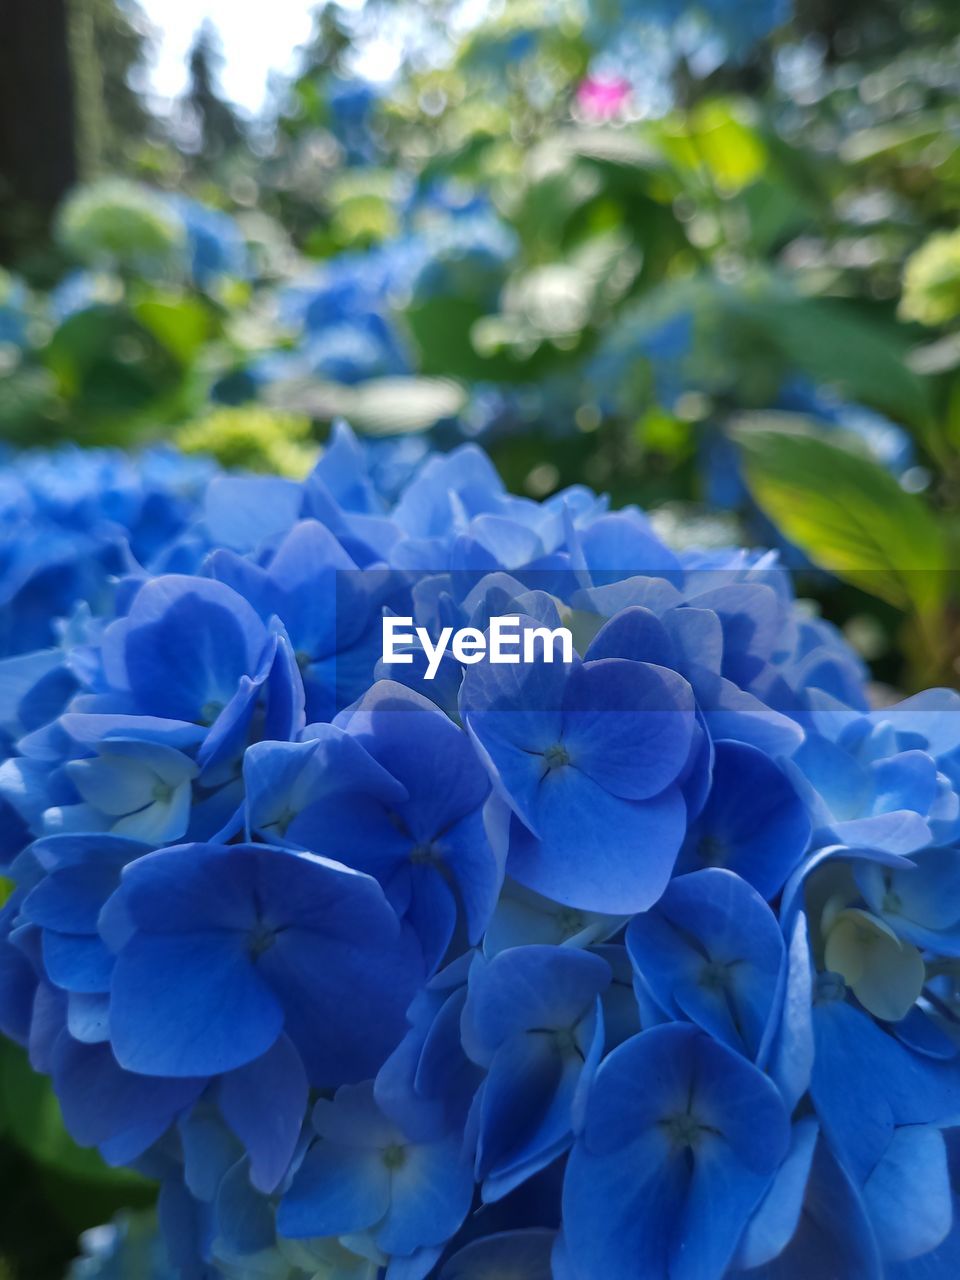 plant, flower, flowering plant, blue, beauty in nature, freshness, close-up, fragility, growth, petal, nature, inflorescence, flower head, purple, hydrangea, no people, focus on foreground, springtime, day, leaf, plant part, outdoors, bunch of flowers, botany, blossom